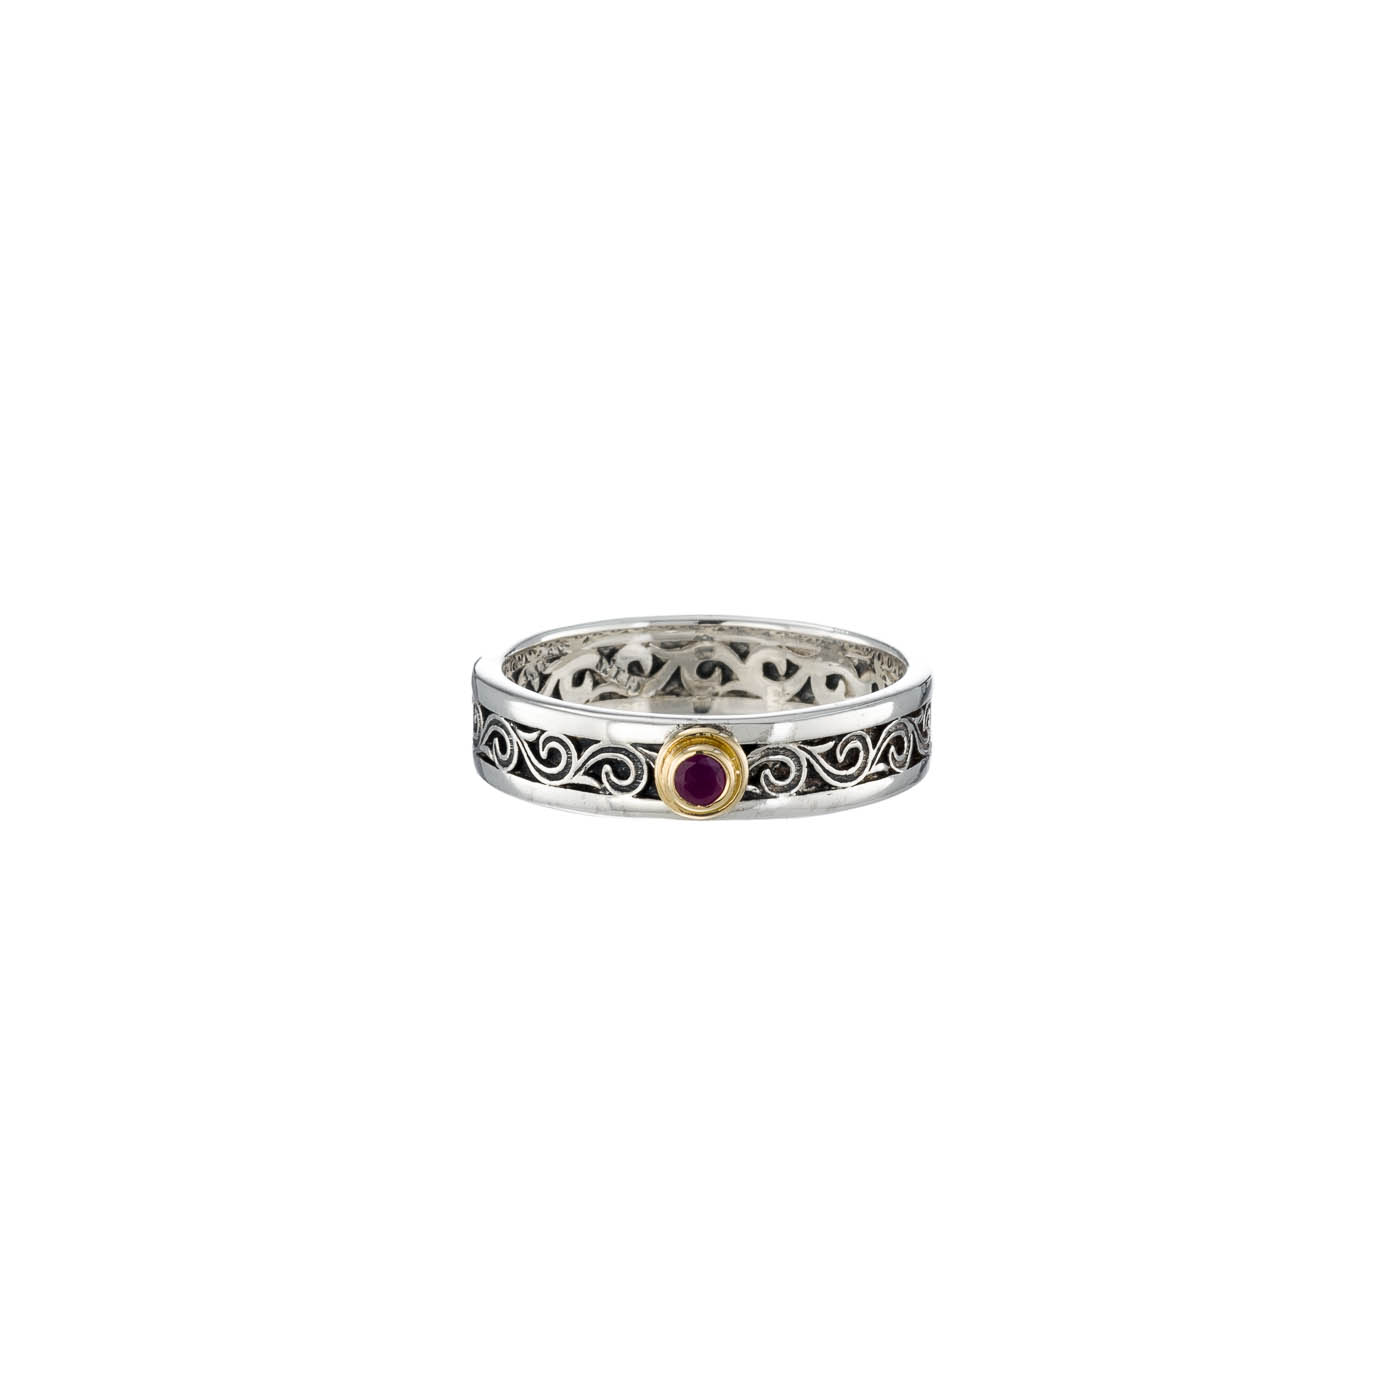 Kyma band ring in Sterling Silver and18K Gold with ruby